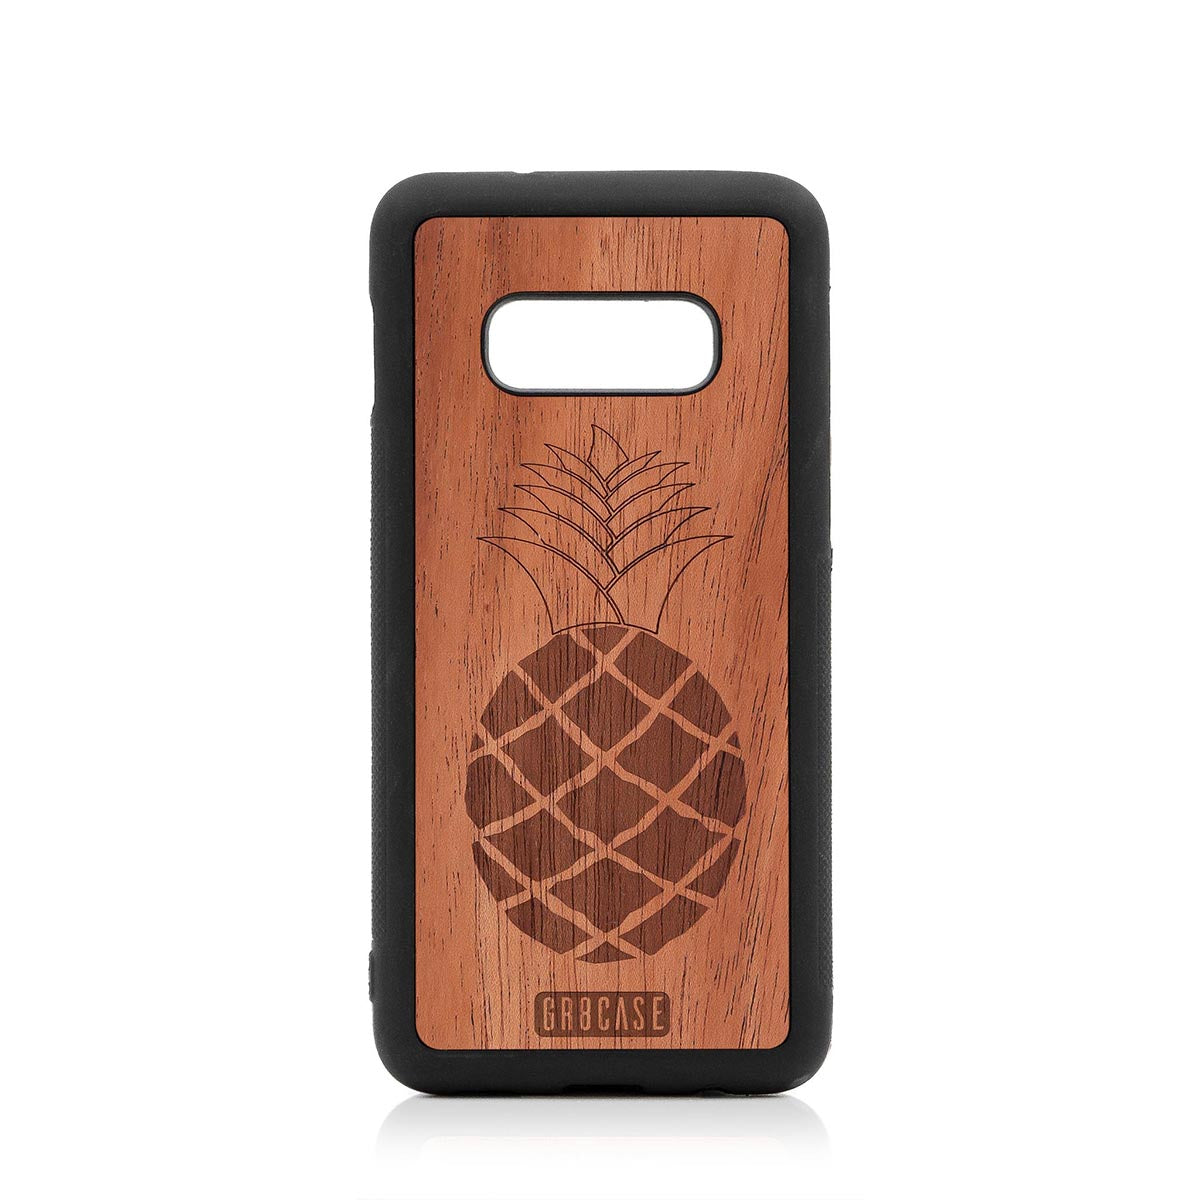 Pineapple Design Wood Case Samsung Galaxy S10E by GR8CASE